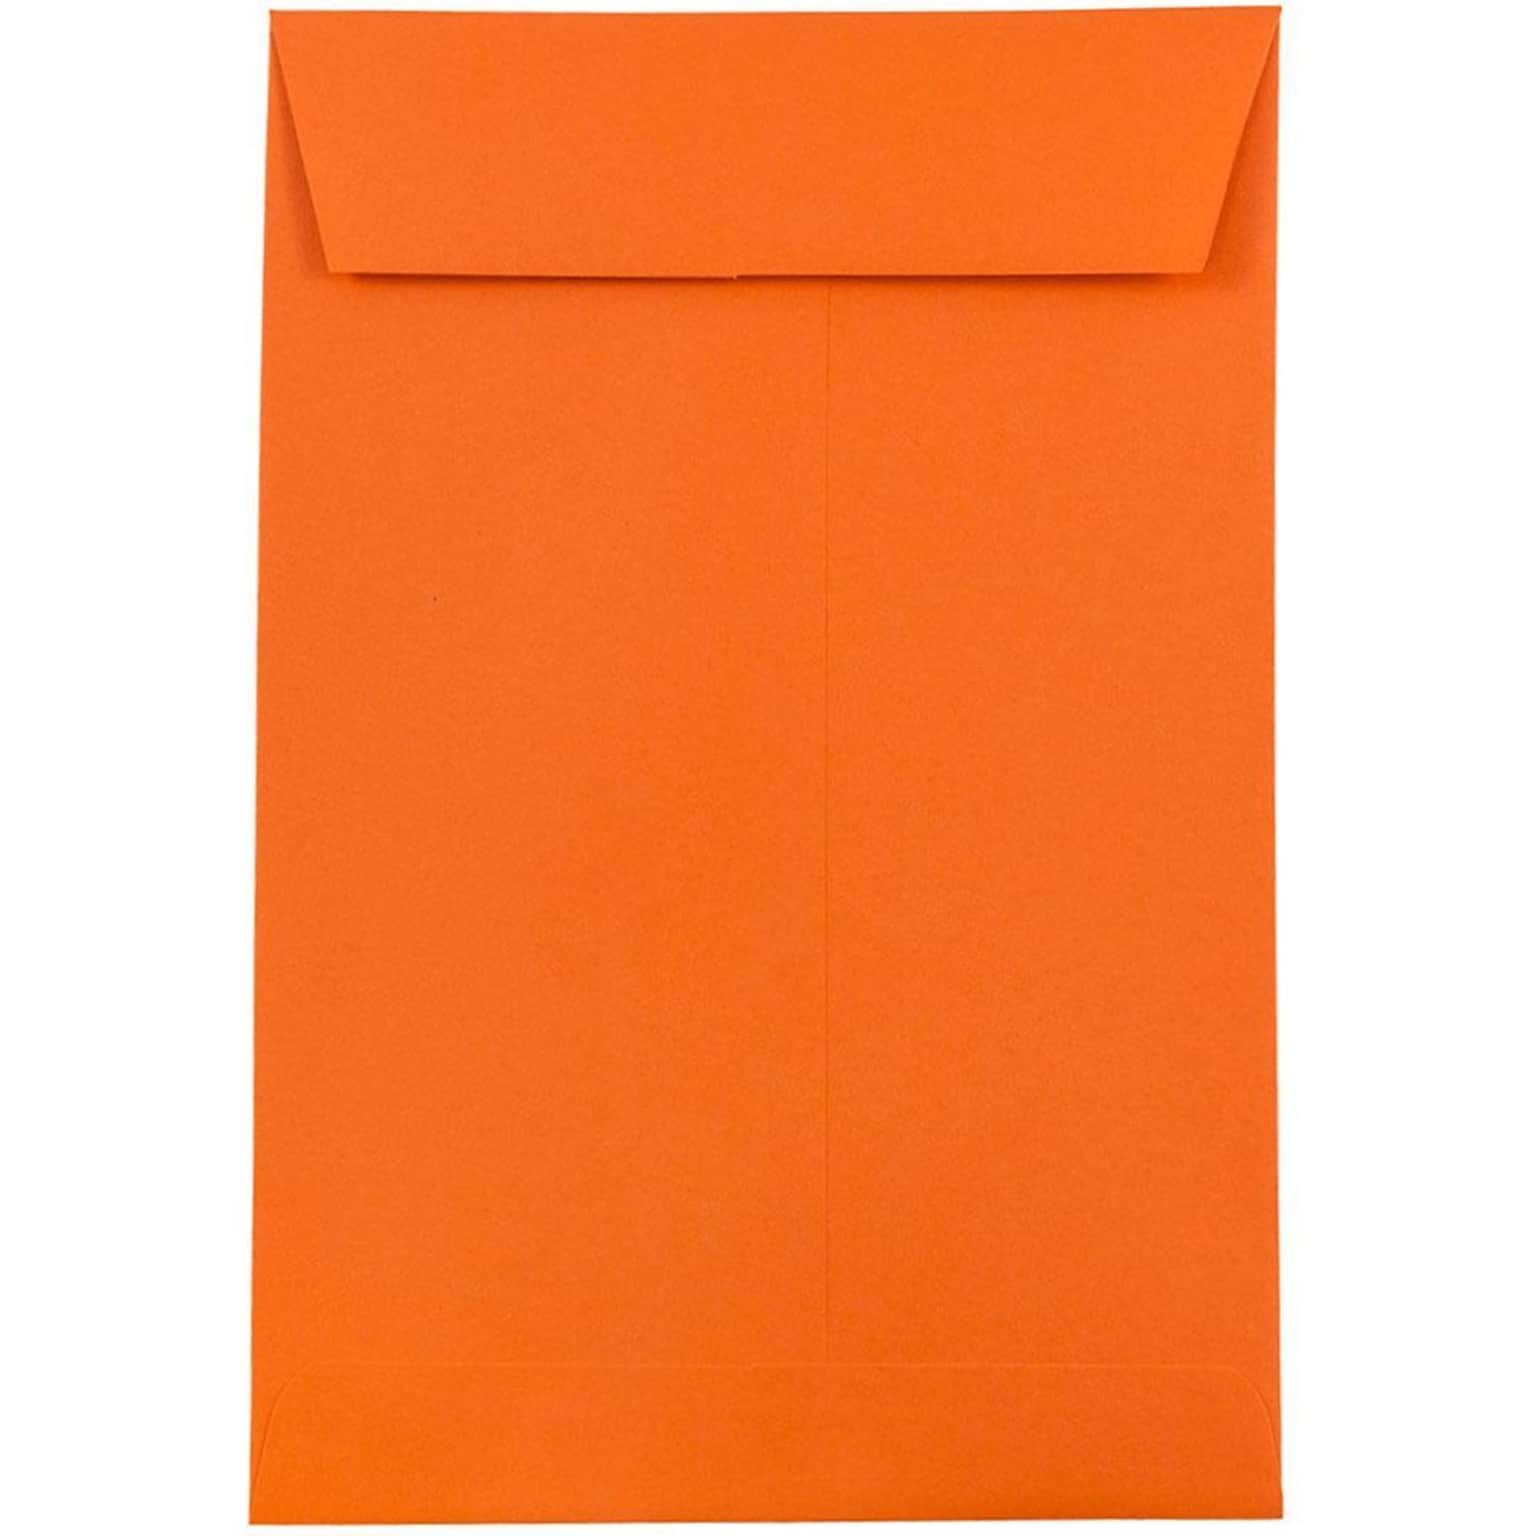 JAM Paper® 6 x 9 Open End Catalog Colored Envelopes, Orange Recycled, 10/Pack (88129B)